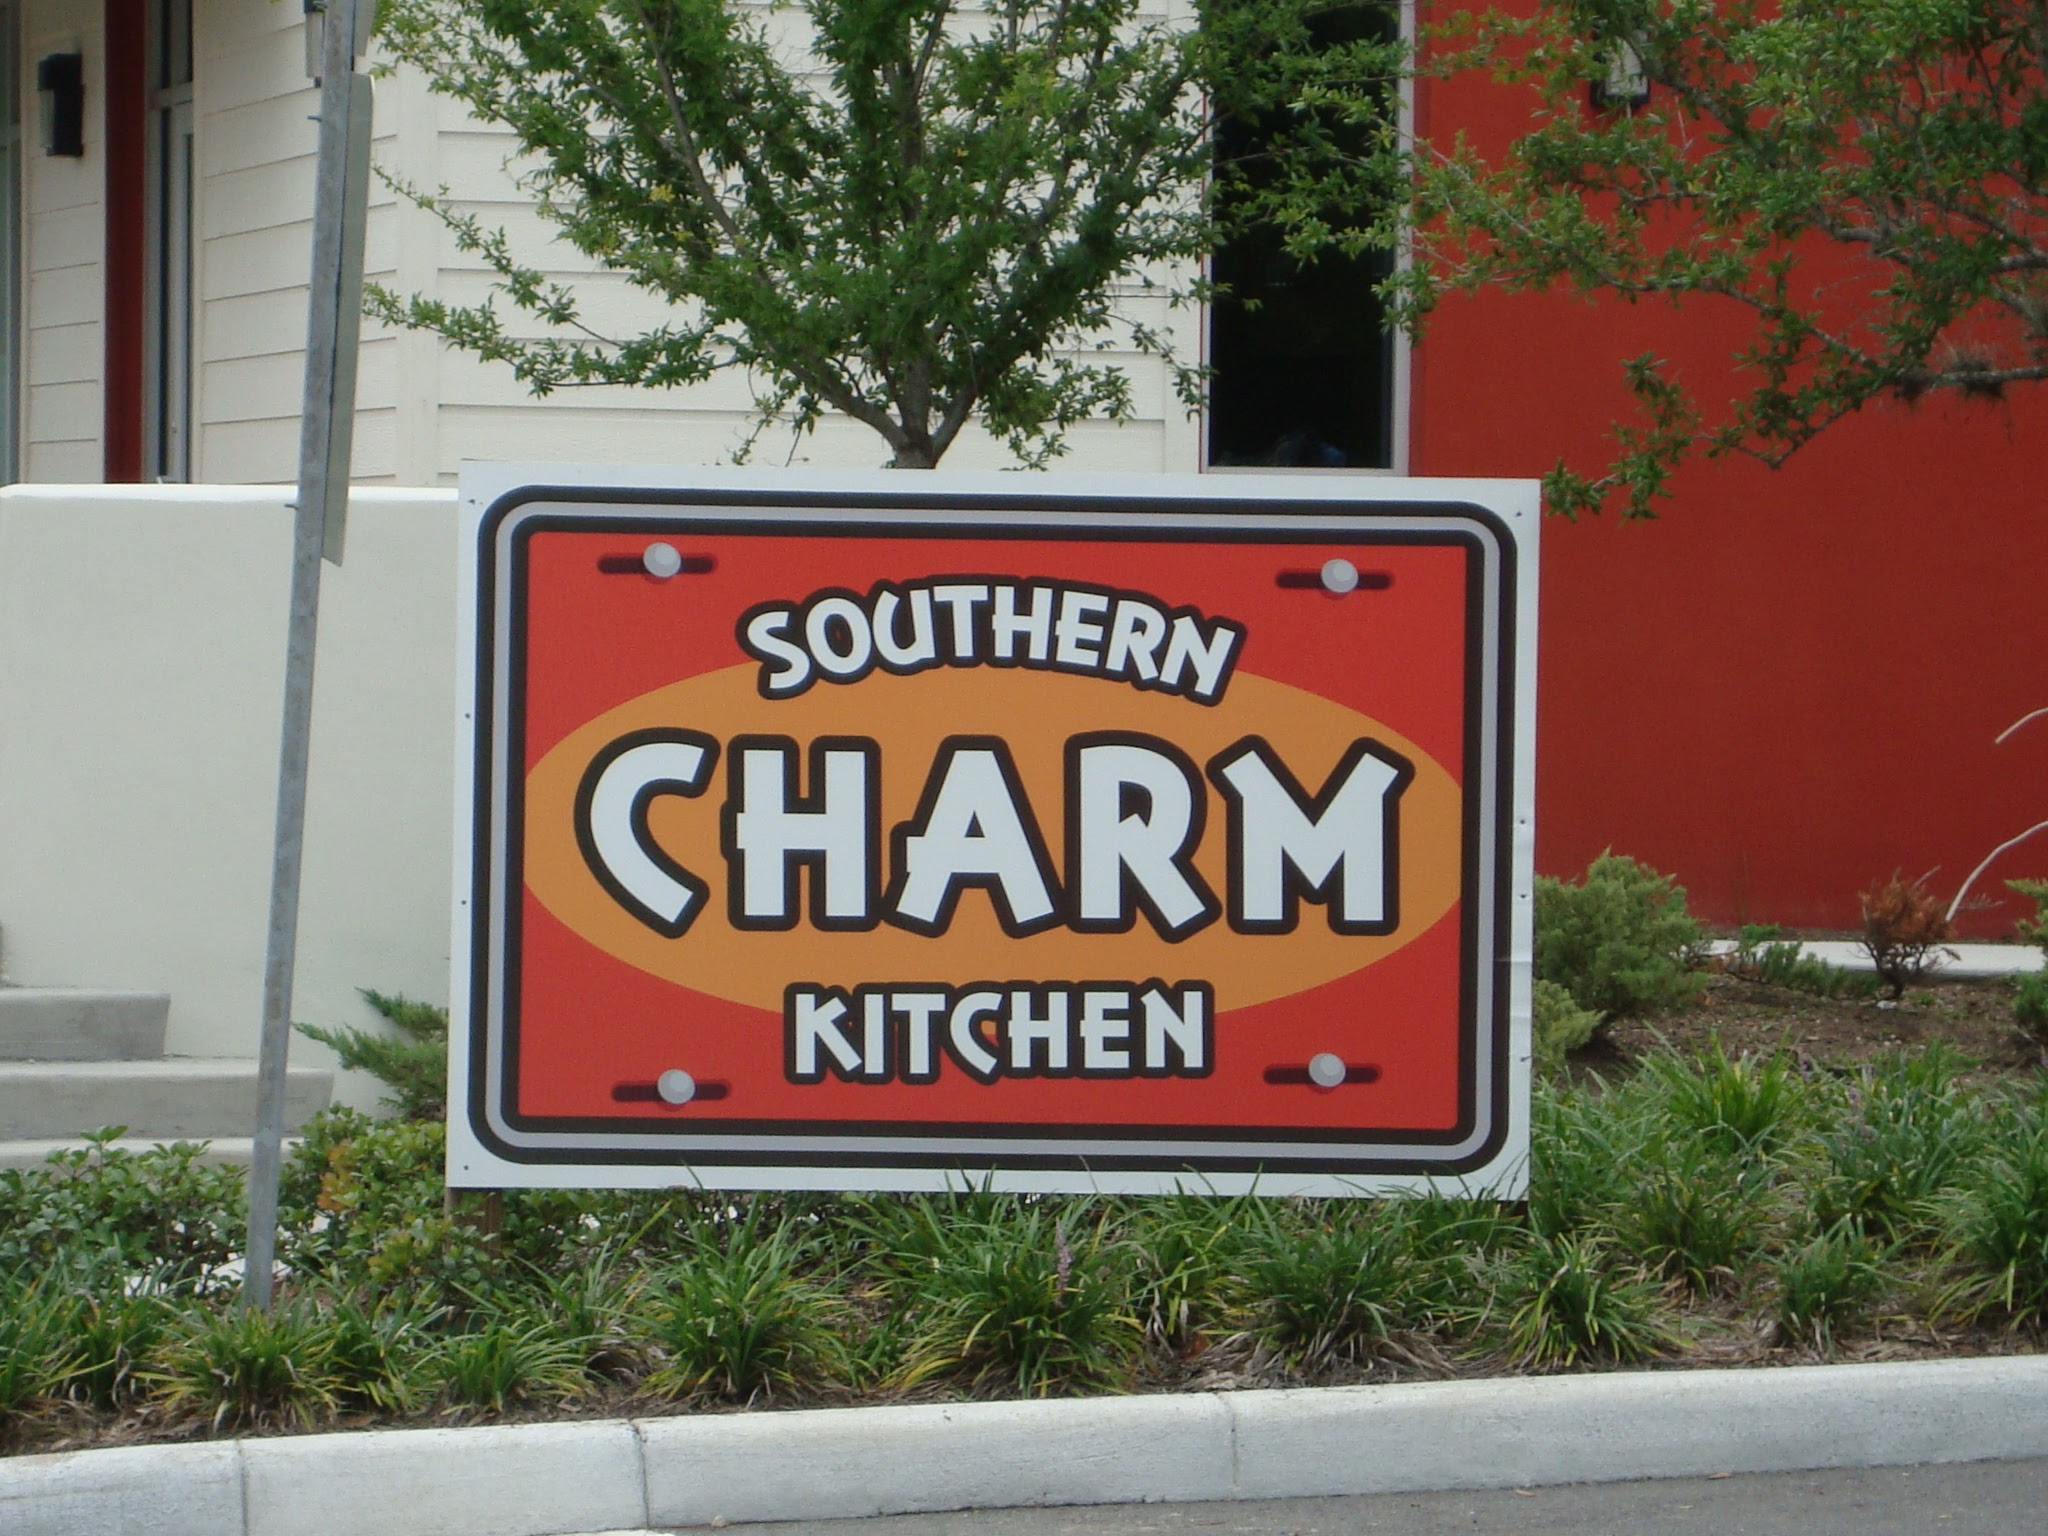 Southern Charm Kitchen Purchases SE Hawthorne Road Property